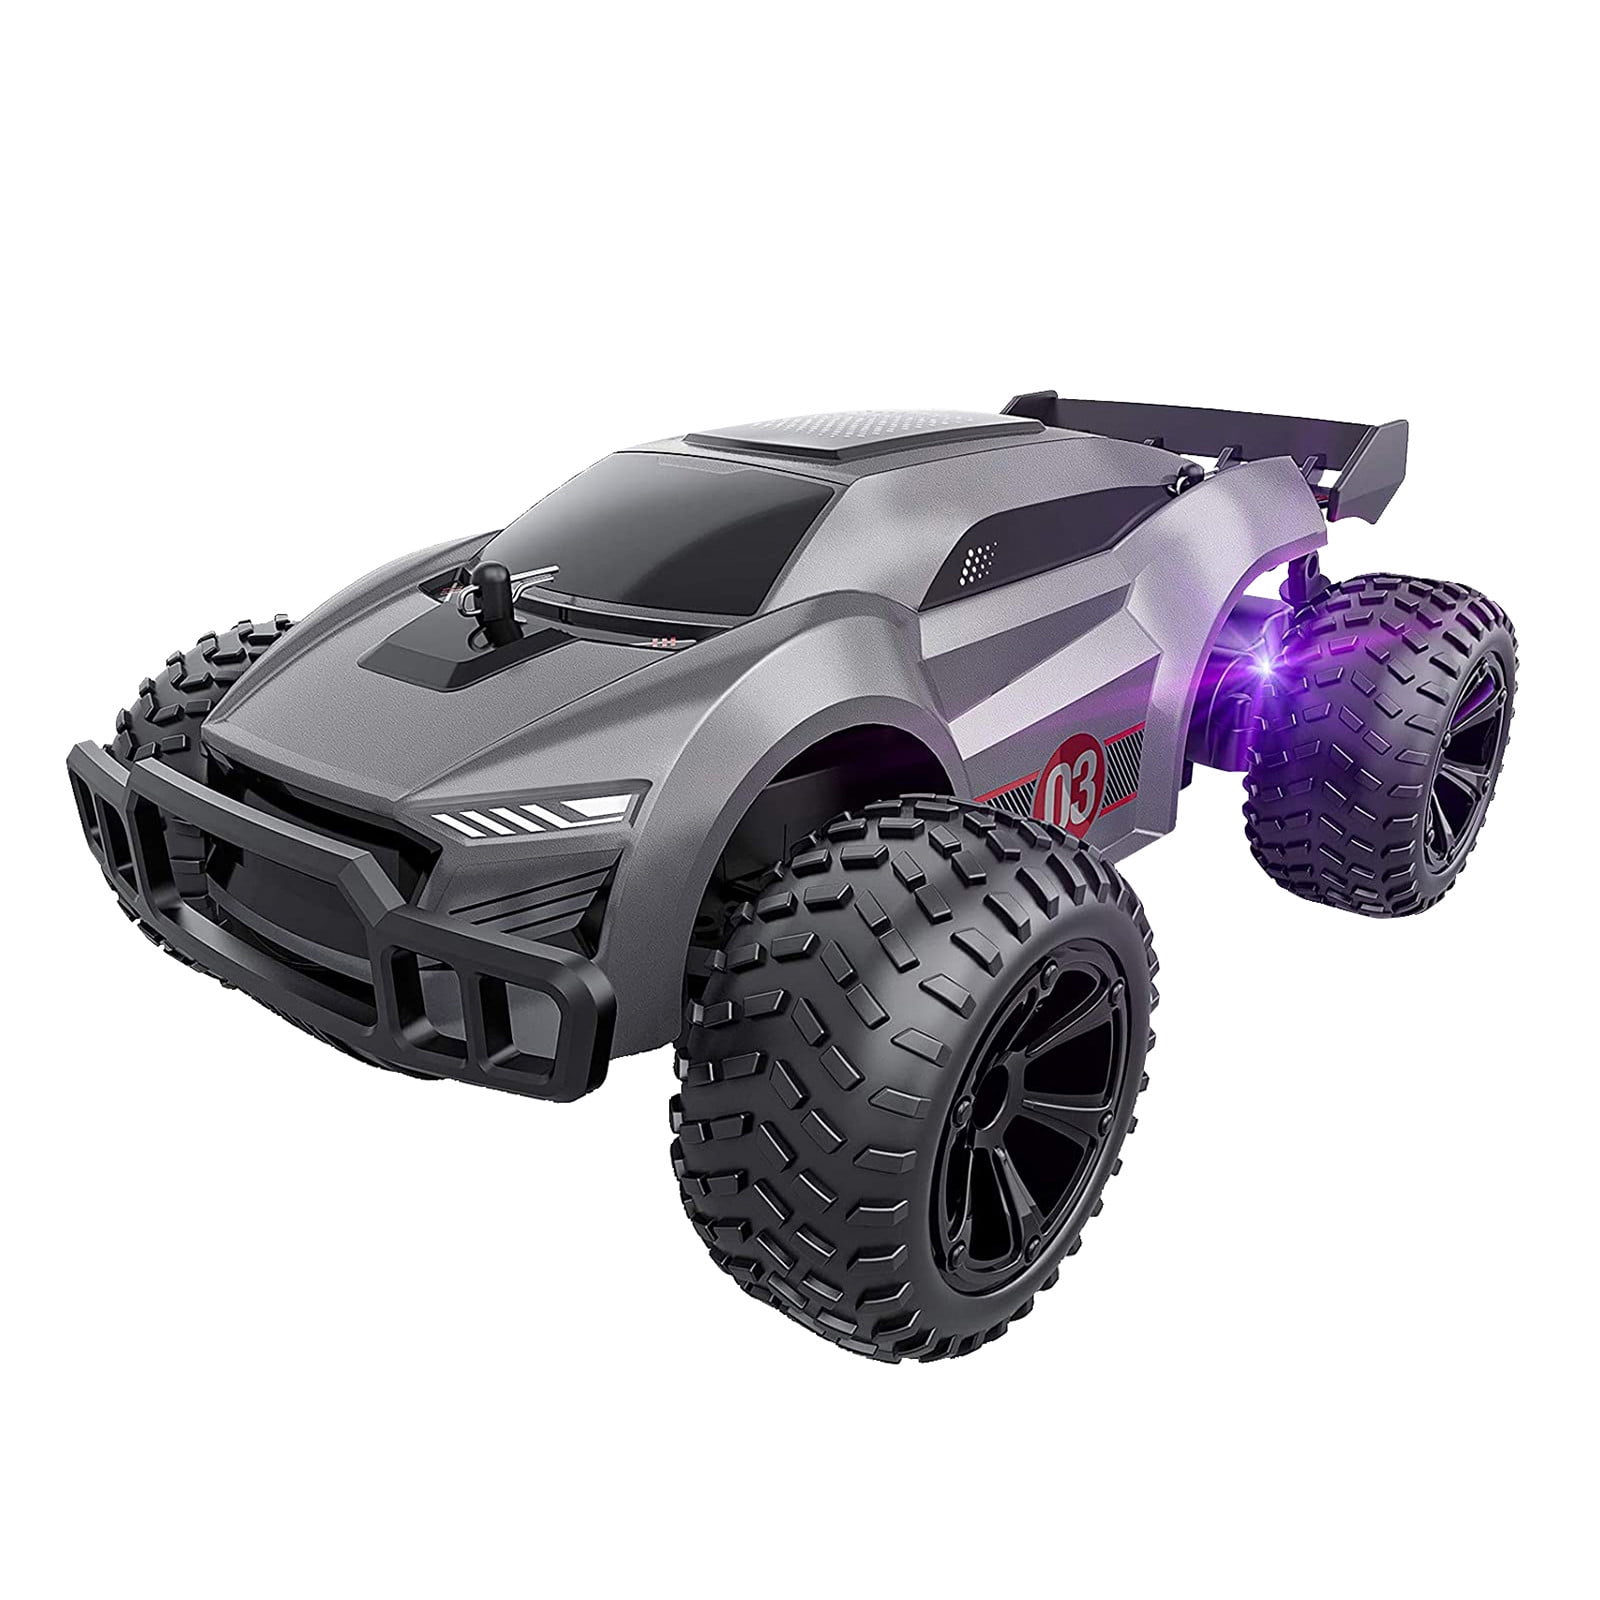 Details about   RC Cars Off-Road Remote Control Car 4WD 2.4Ghz 1/10 Scale RTR Hobby Toy,1:10 